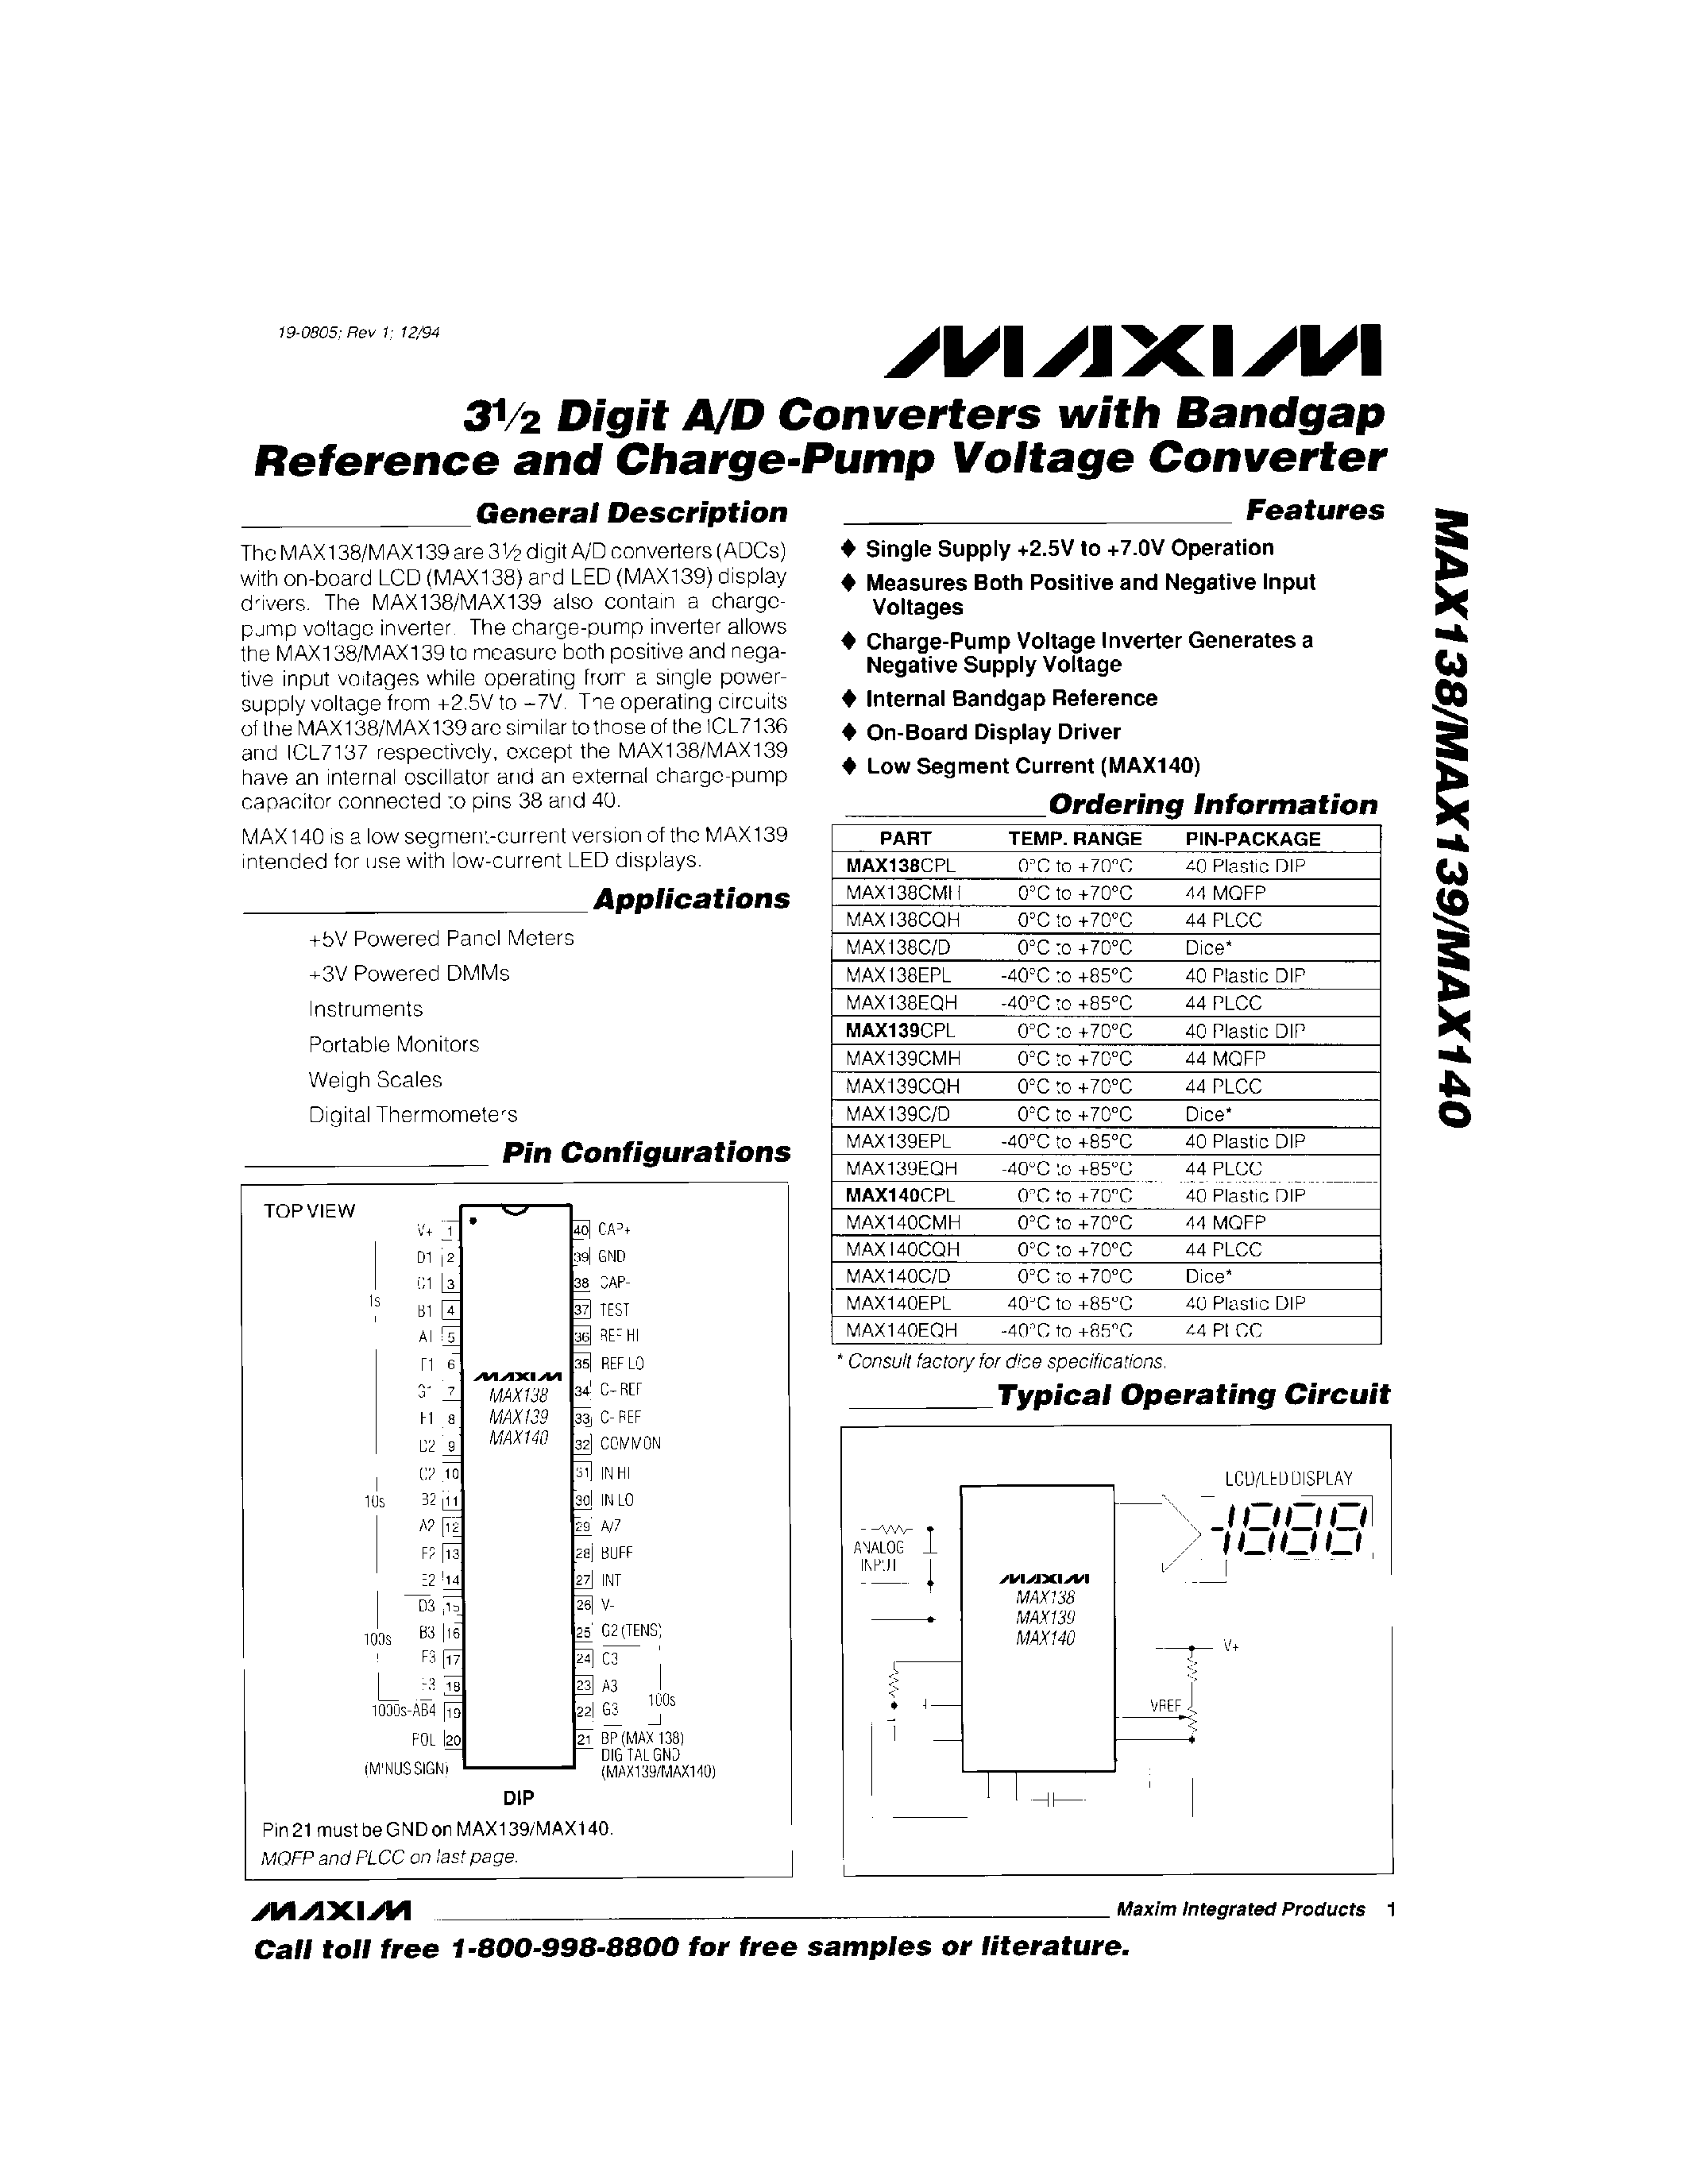 Datasheet MAX138C/D - 3Digit A/D Converters with Bandgap Refrence and Charge-Pump Voltage Converter page 1